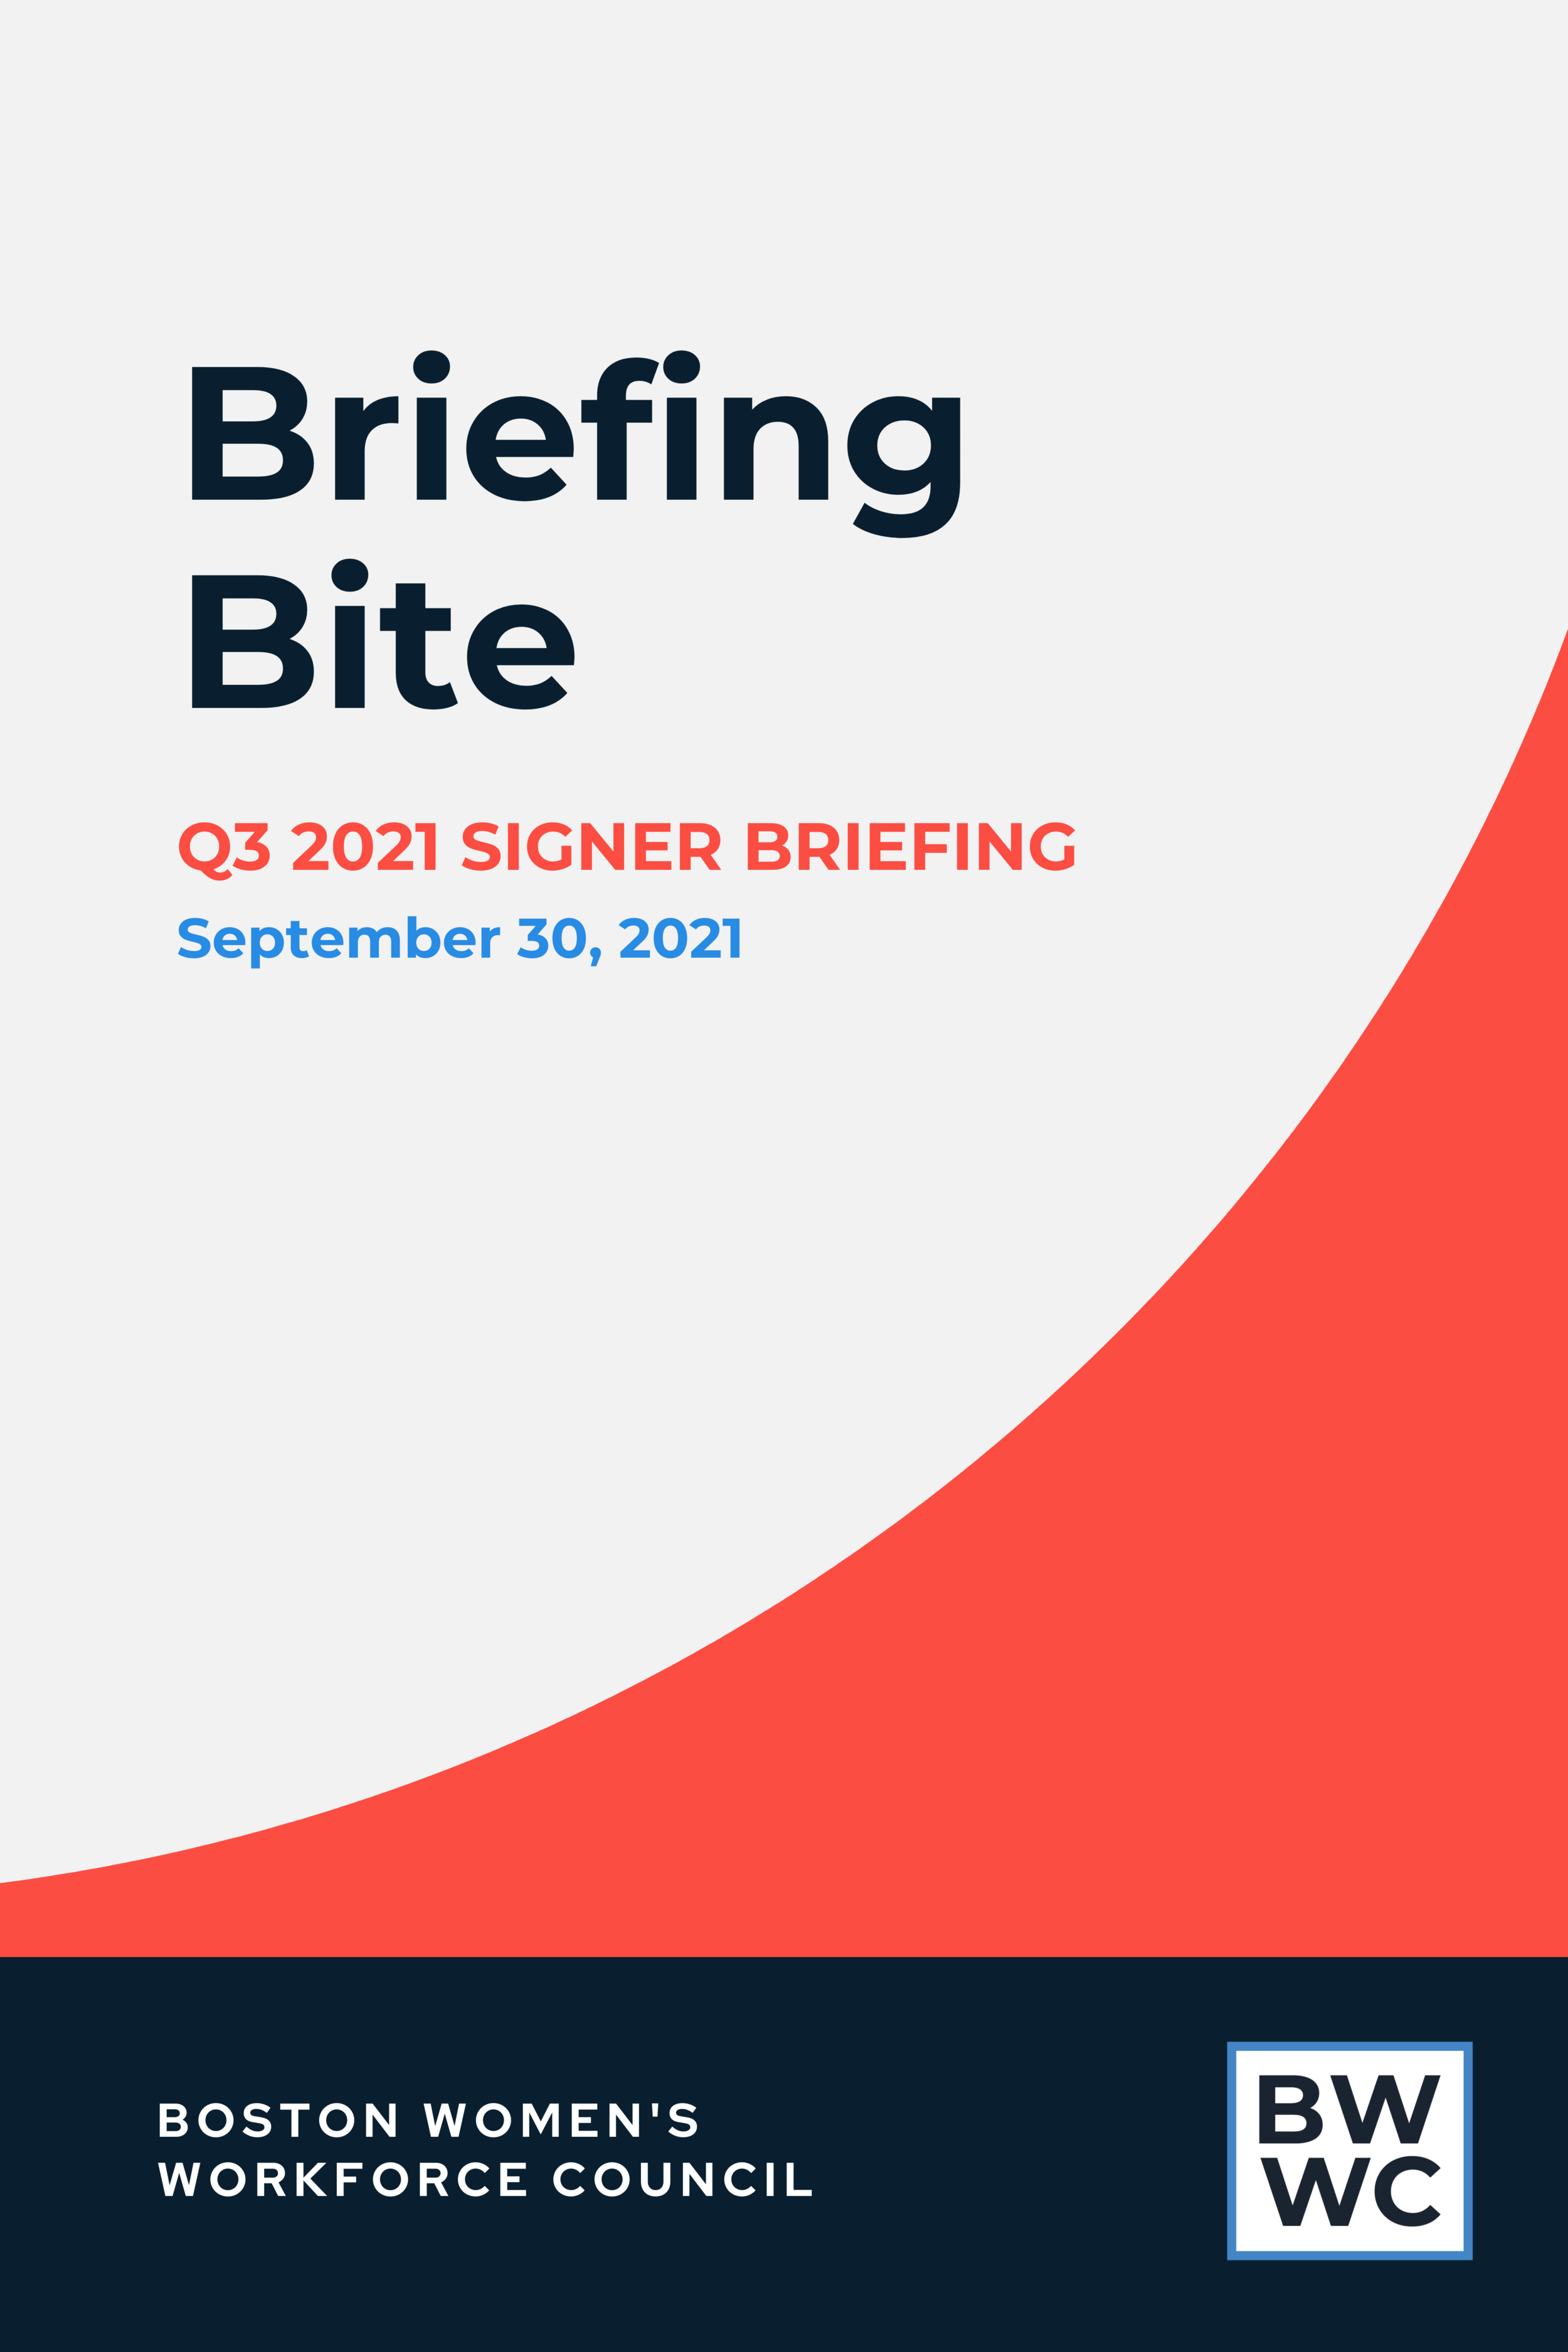 Copy of Q2 Signer Briefing Bite.png